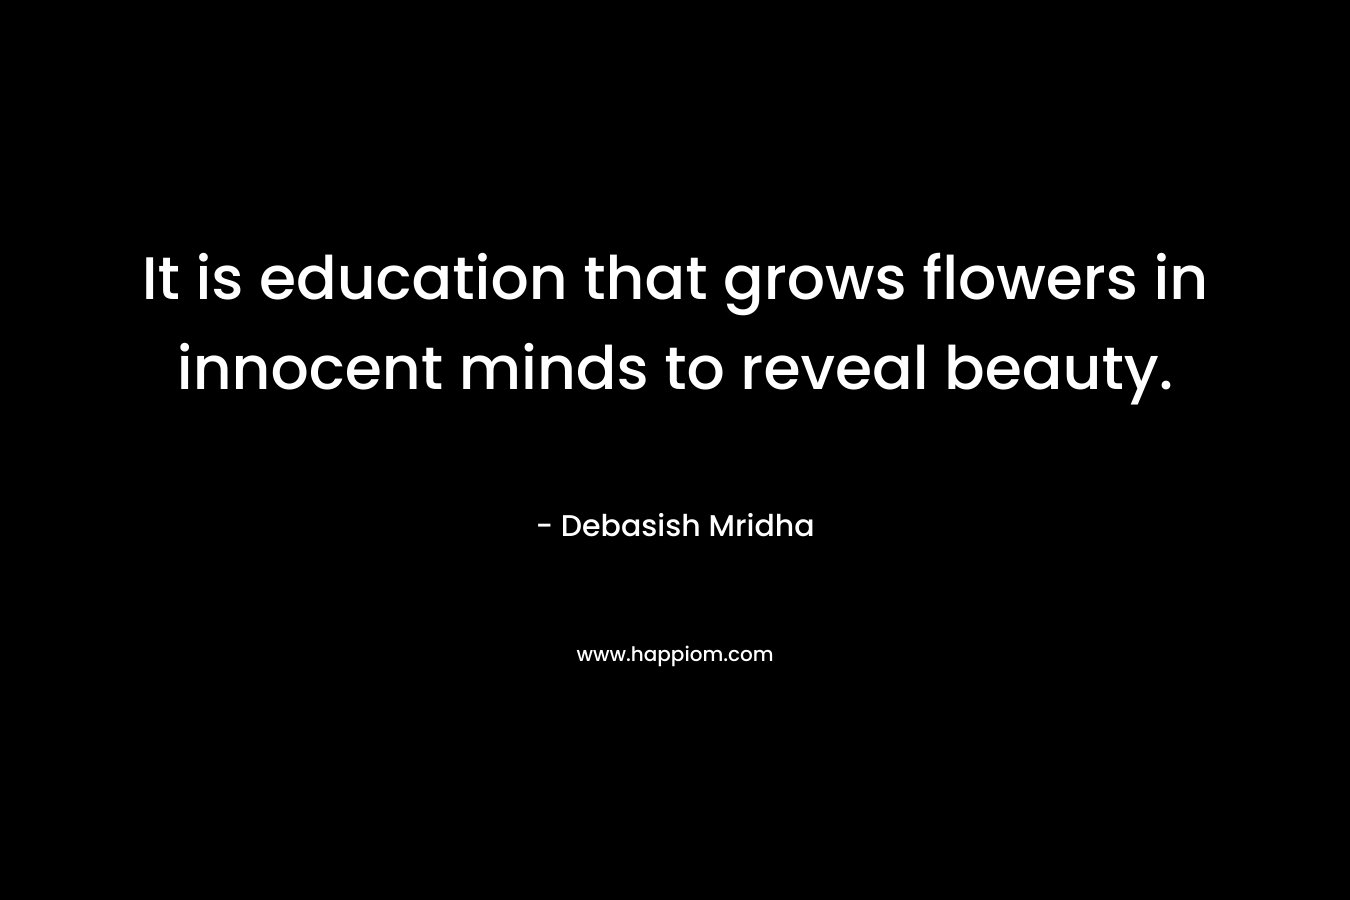 It is education that grows flowers in innocent minds to reveal beauty. – Debasish Mridha